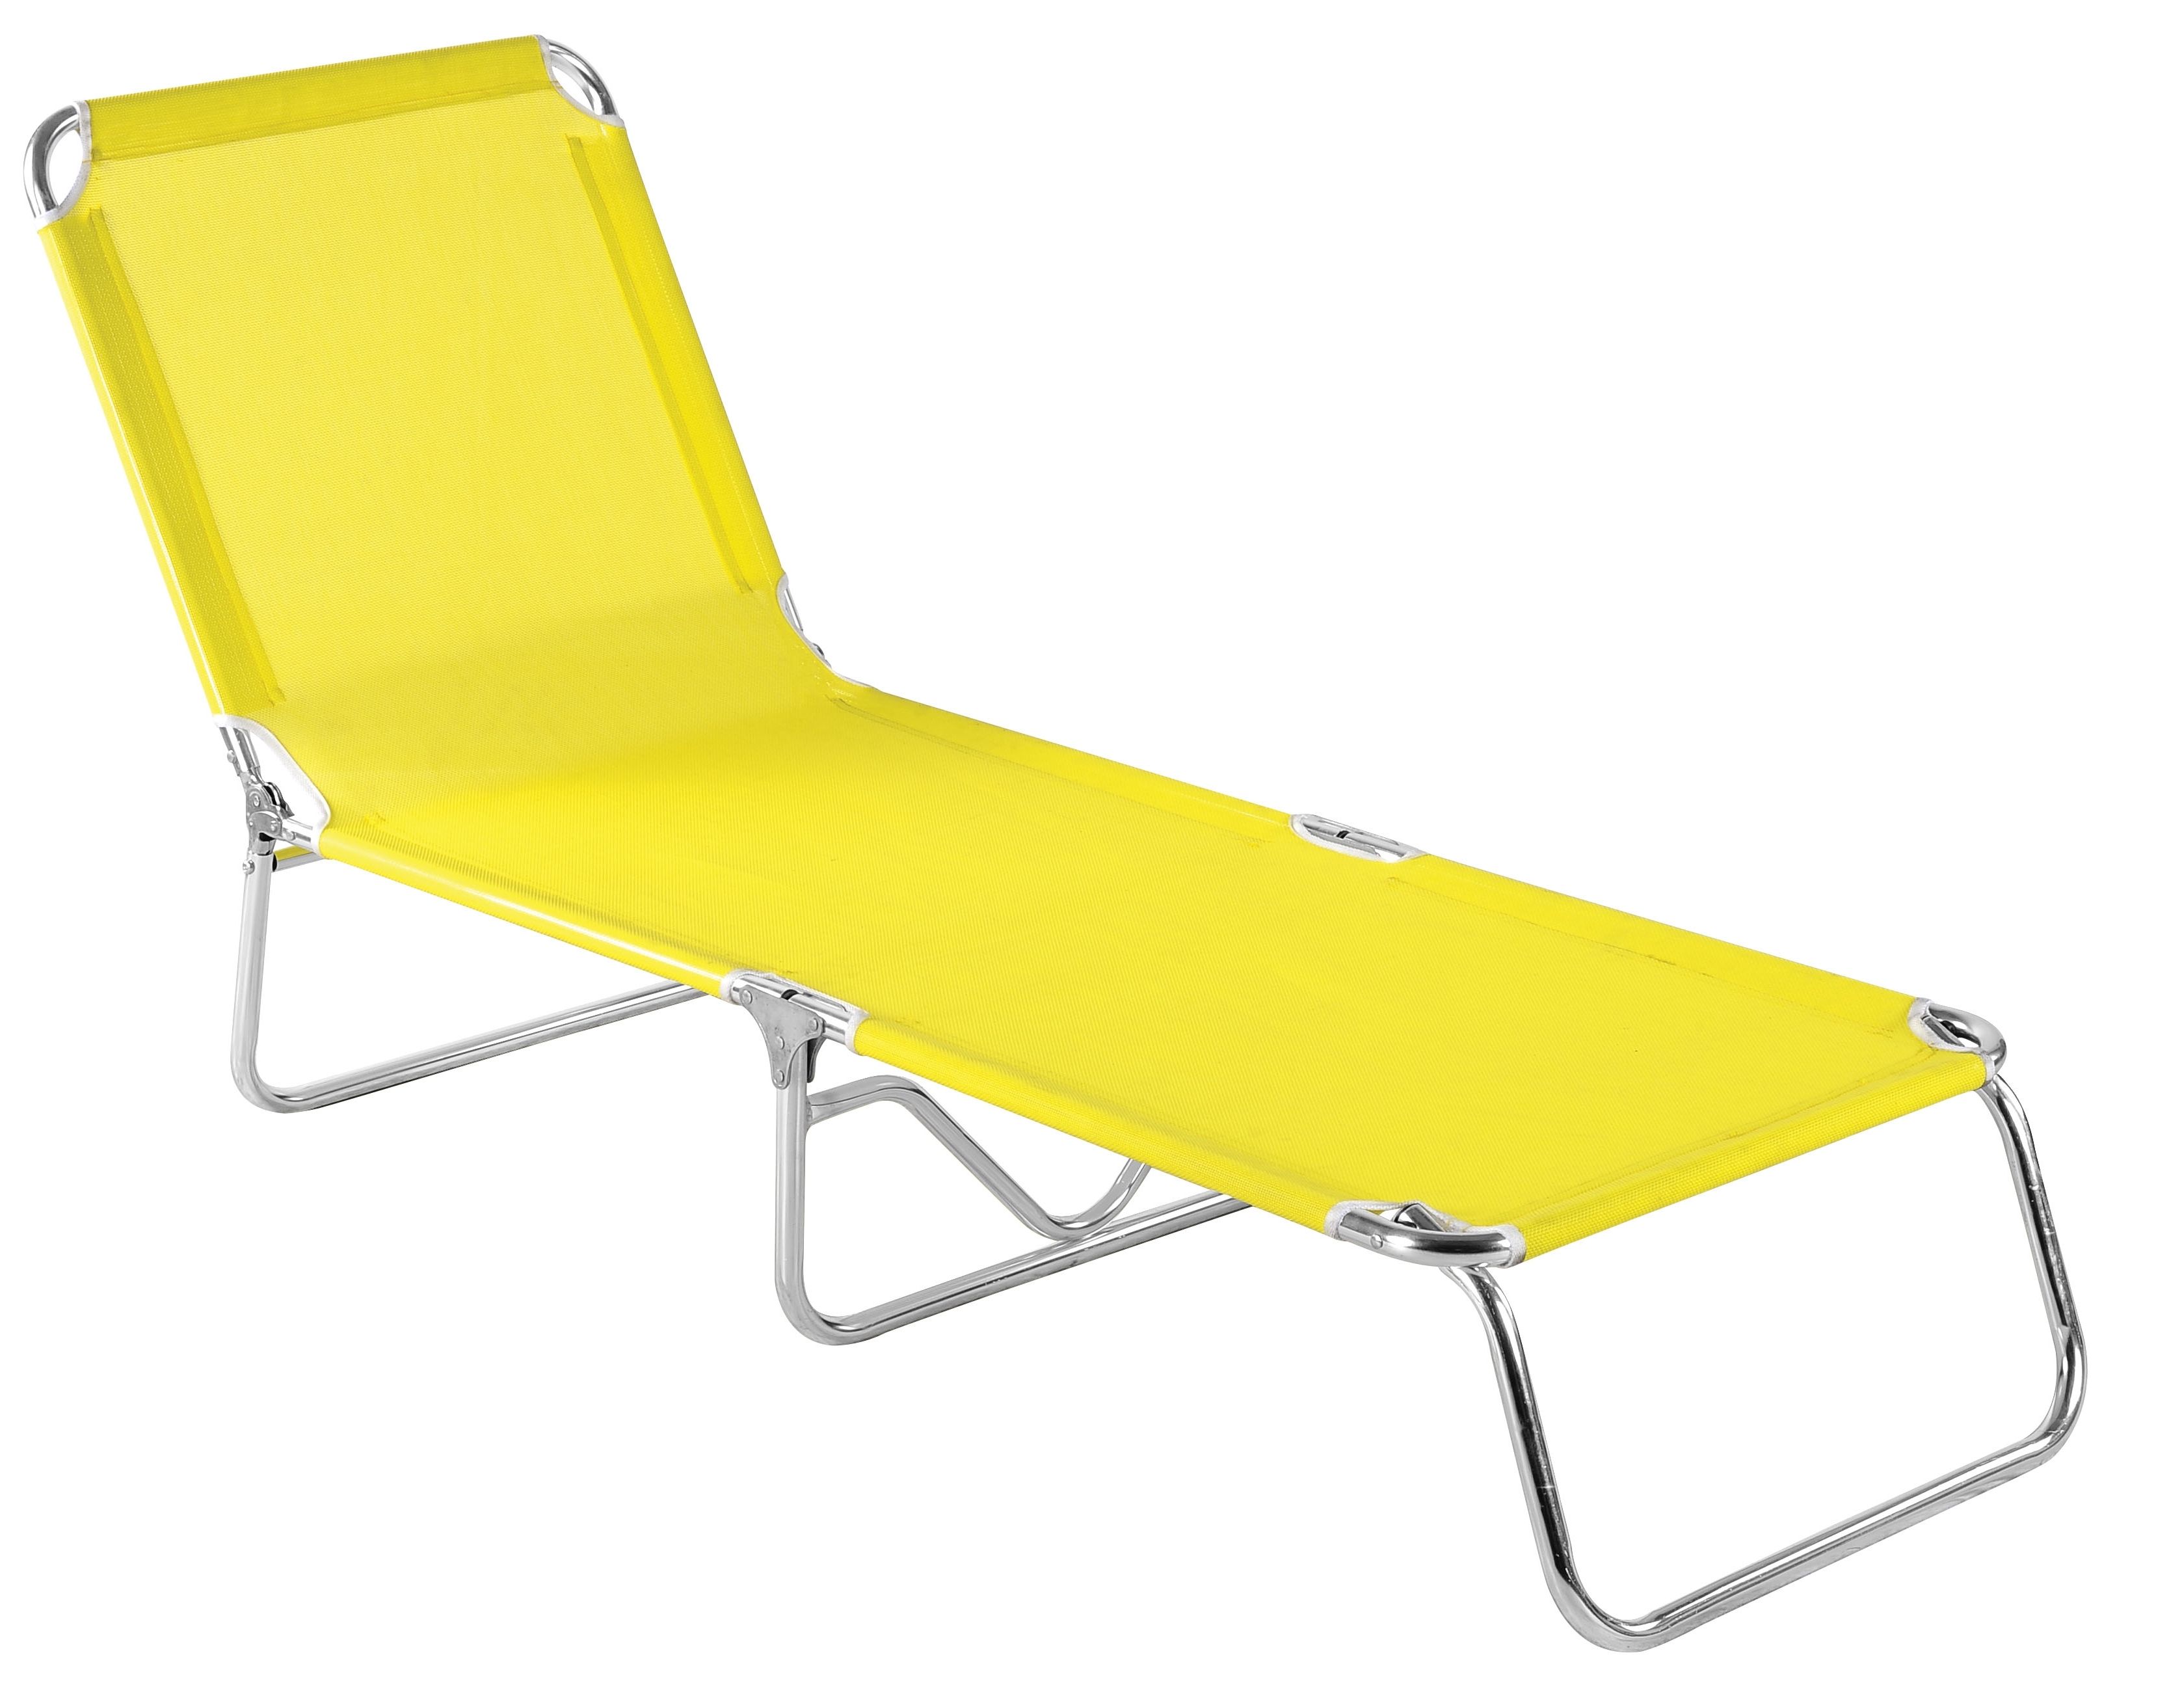 Jelly Chaise Lounge Chairs For Fashionable Folding Jelly Chaise Lounge Chair • Lounge Chairs Ideas (View 1 of 15)